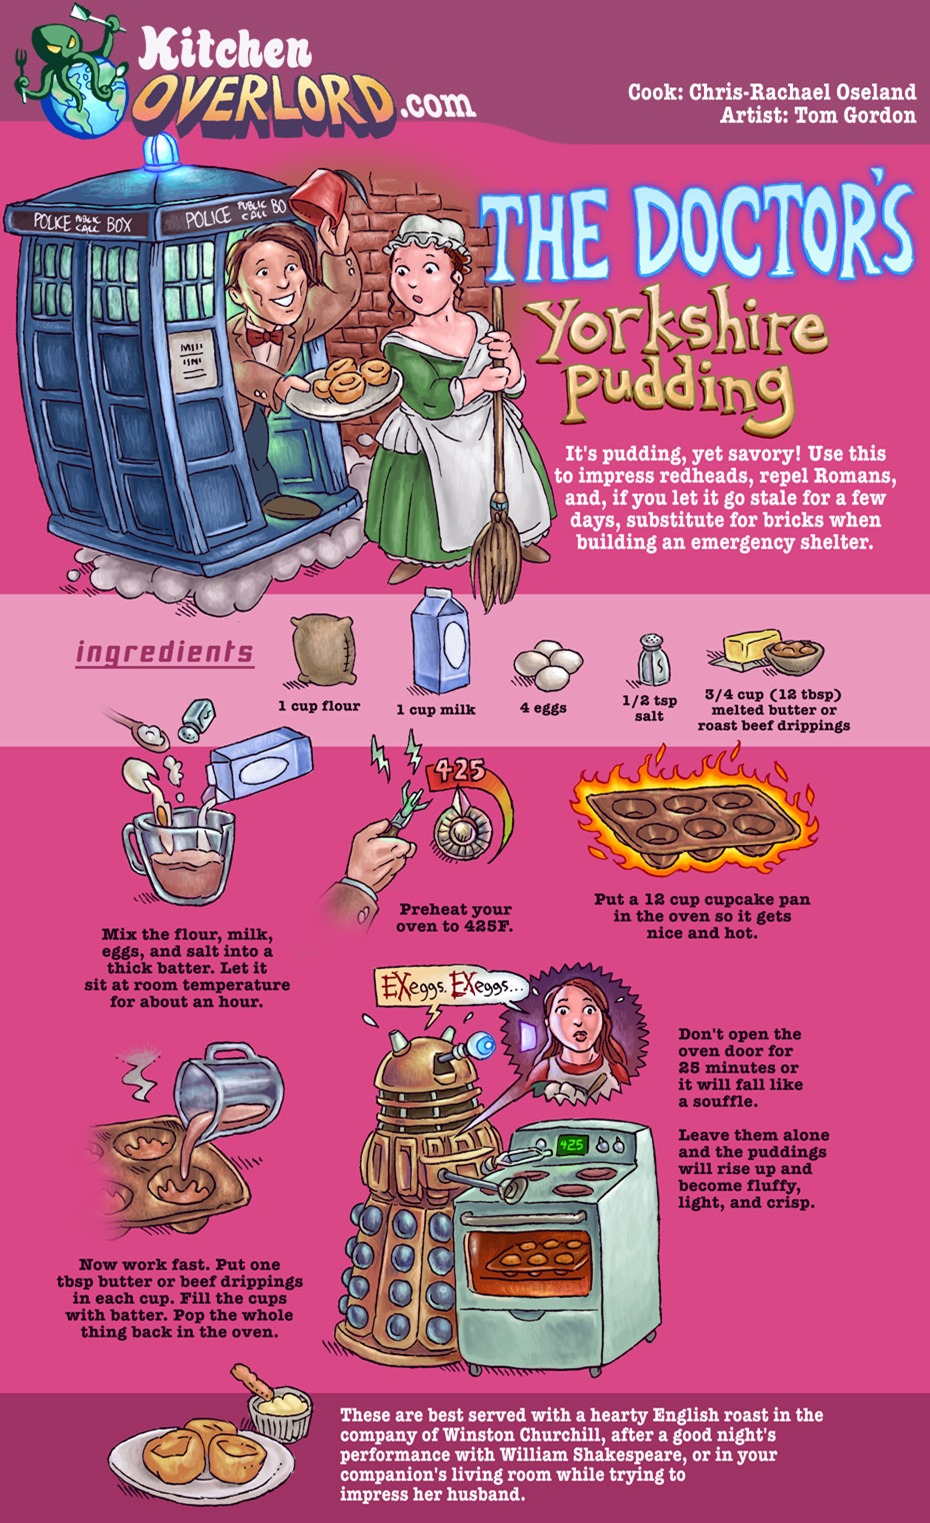 Recipe for The Doctor's Yorkshire Pudding